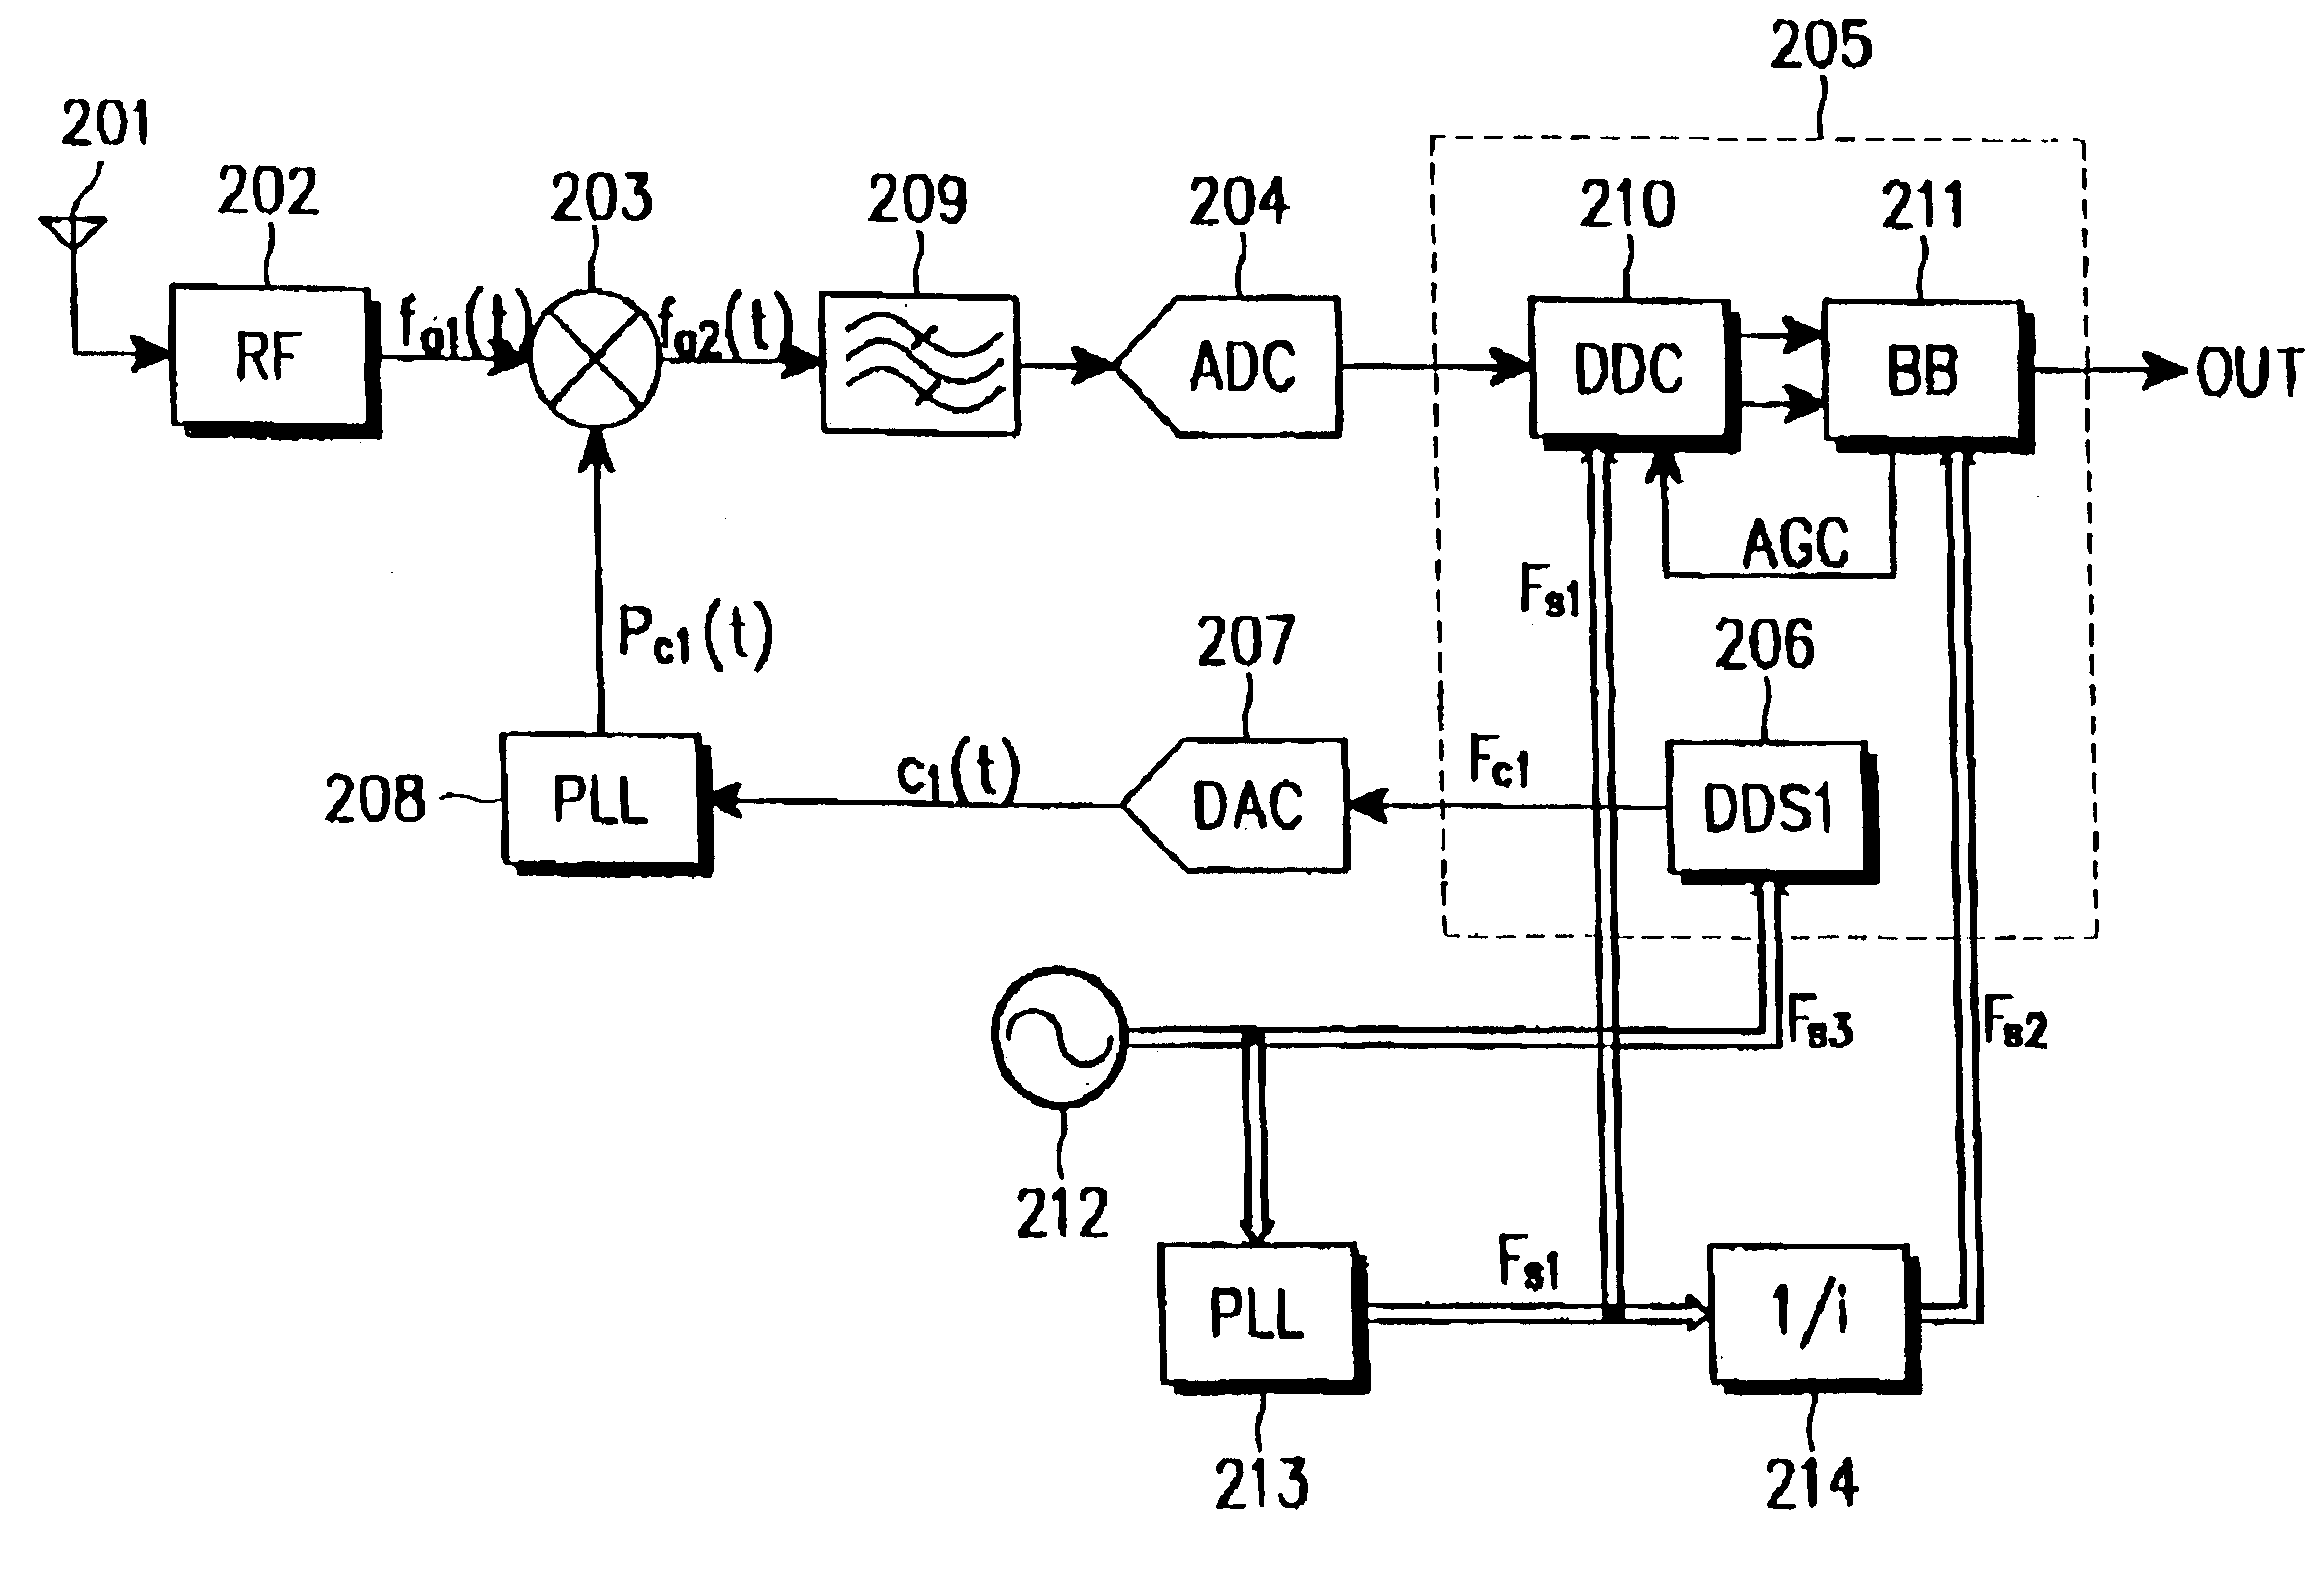 Receiver in a radio communication system